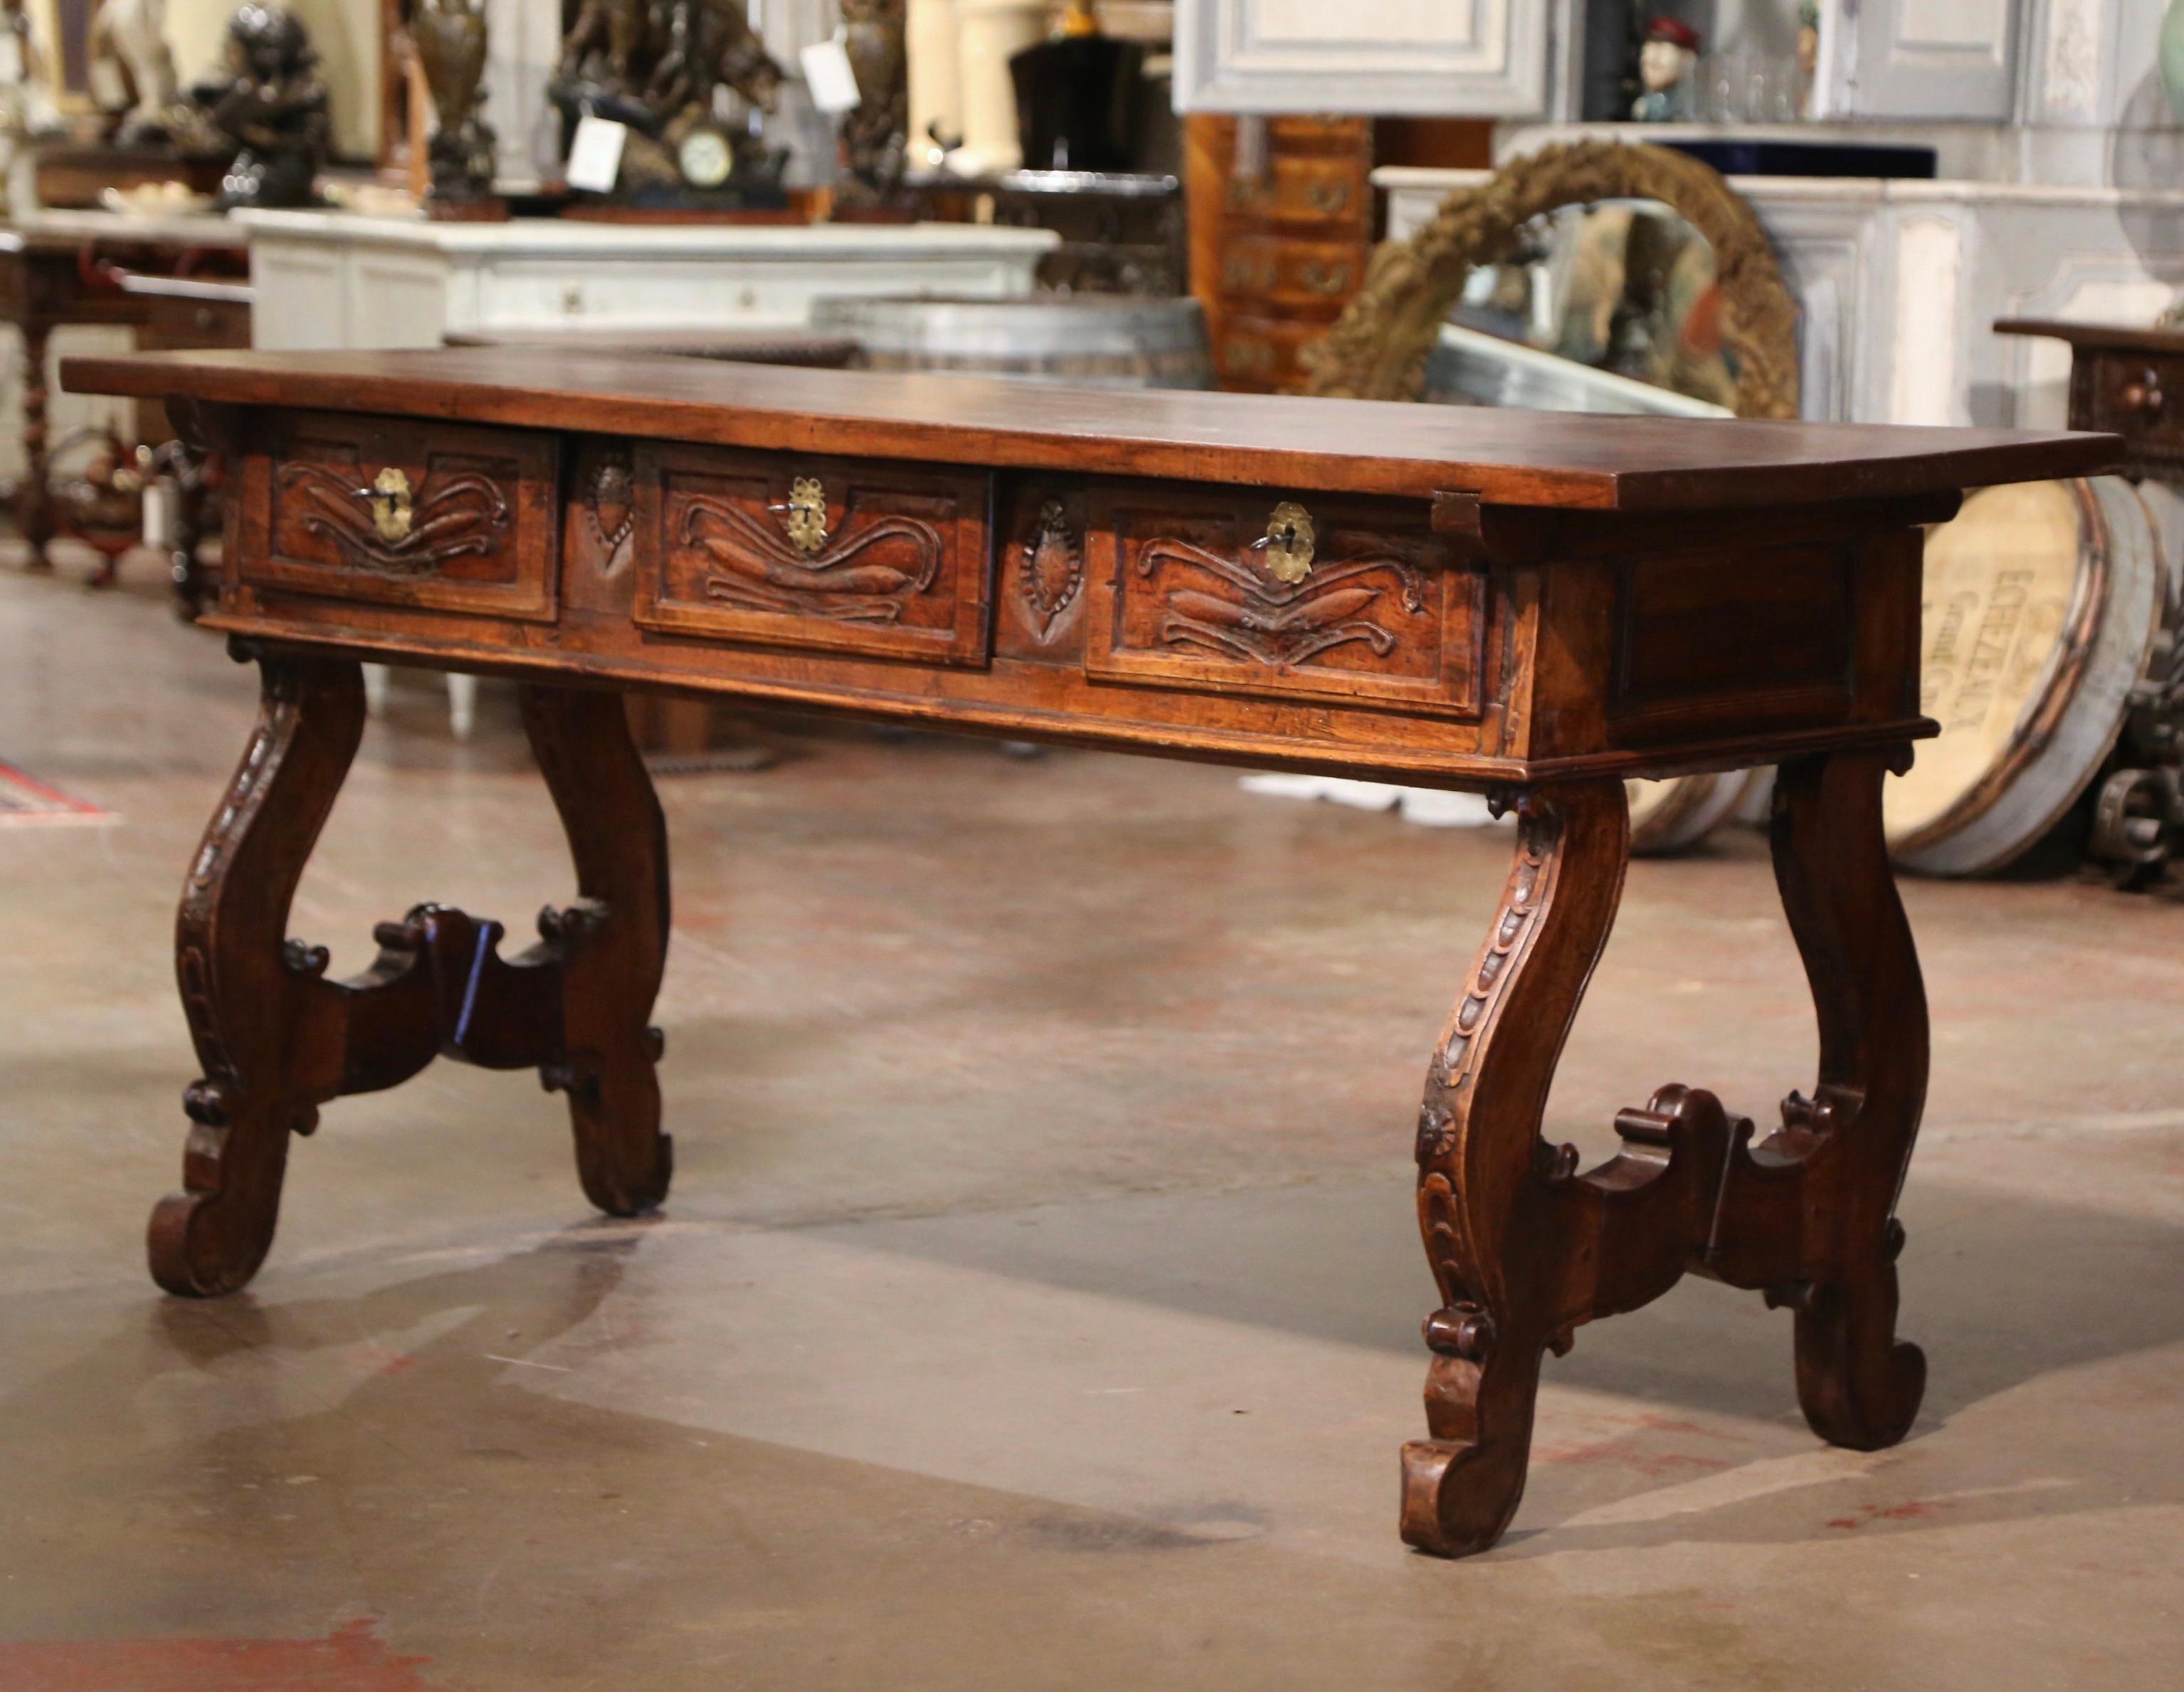 Add an elegant focal point to your study or library with this antique Spanish carved console. Carved in Spain circa 1750 and built of solid walnut wood, the trestle table stands on two intricate carved legs with scroll motifs. The desk is dressed